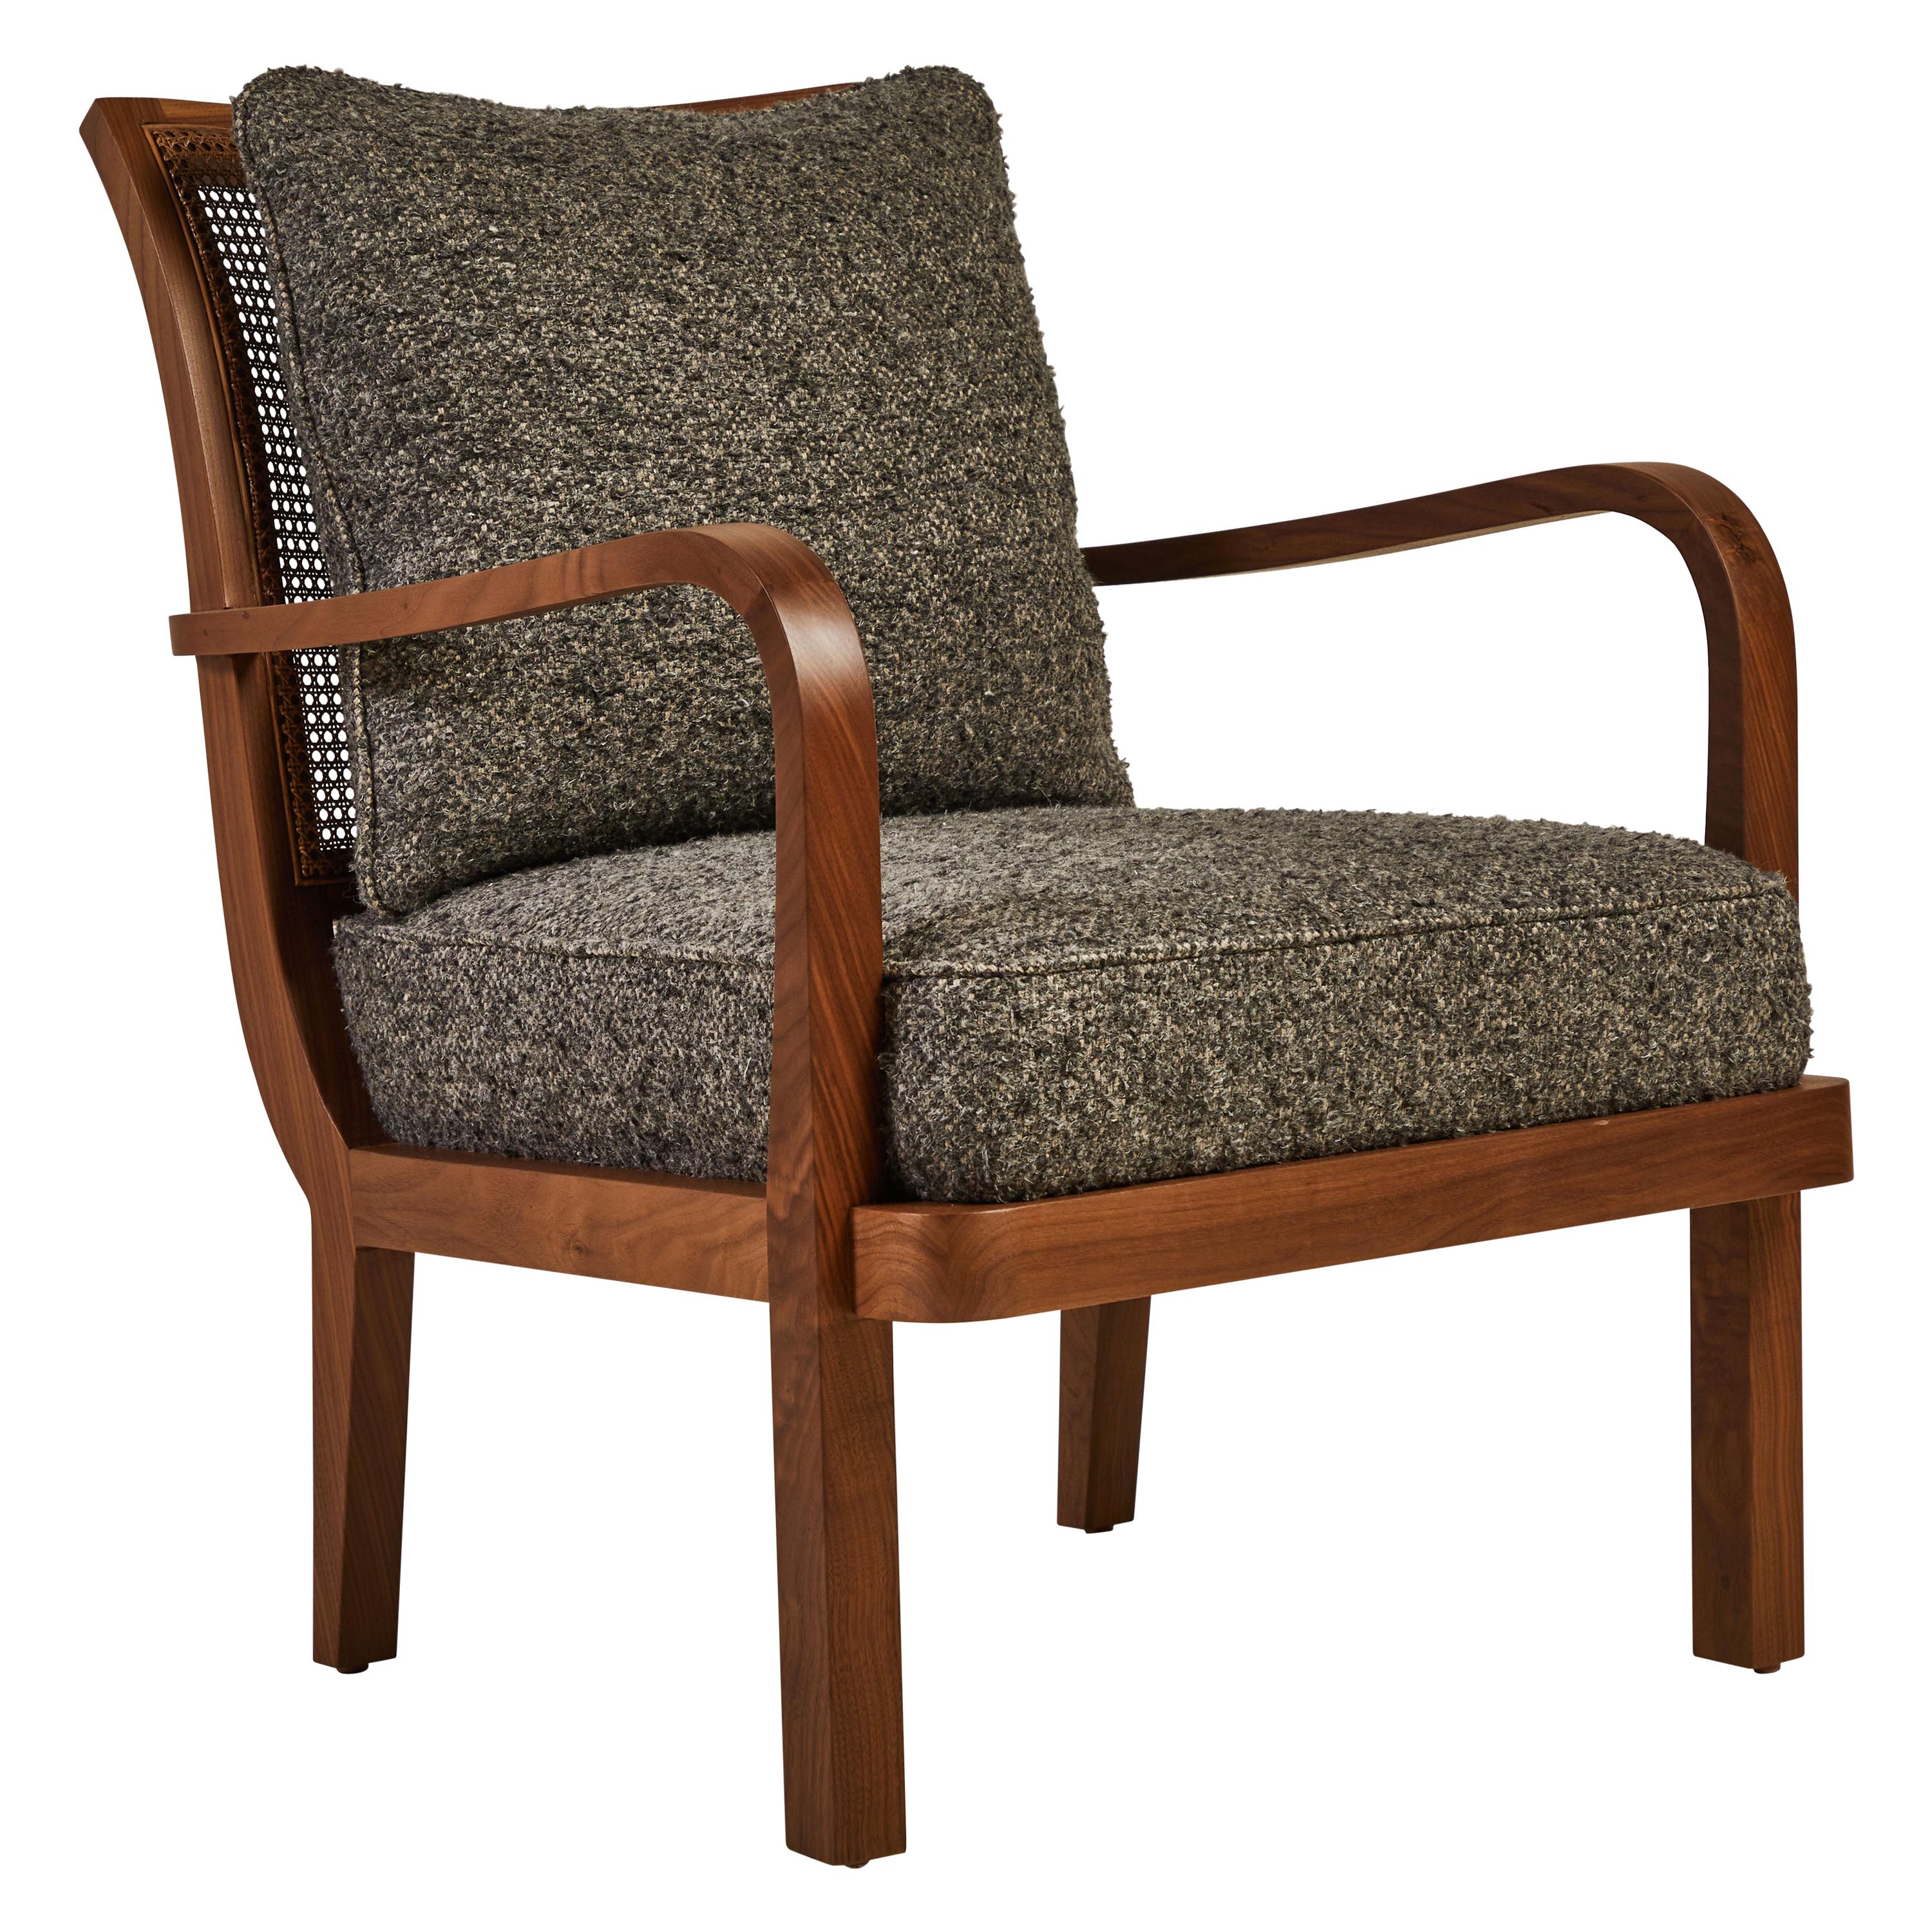 Nickey Kehoe Collection Cane Back Chair